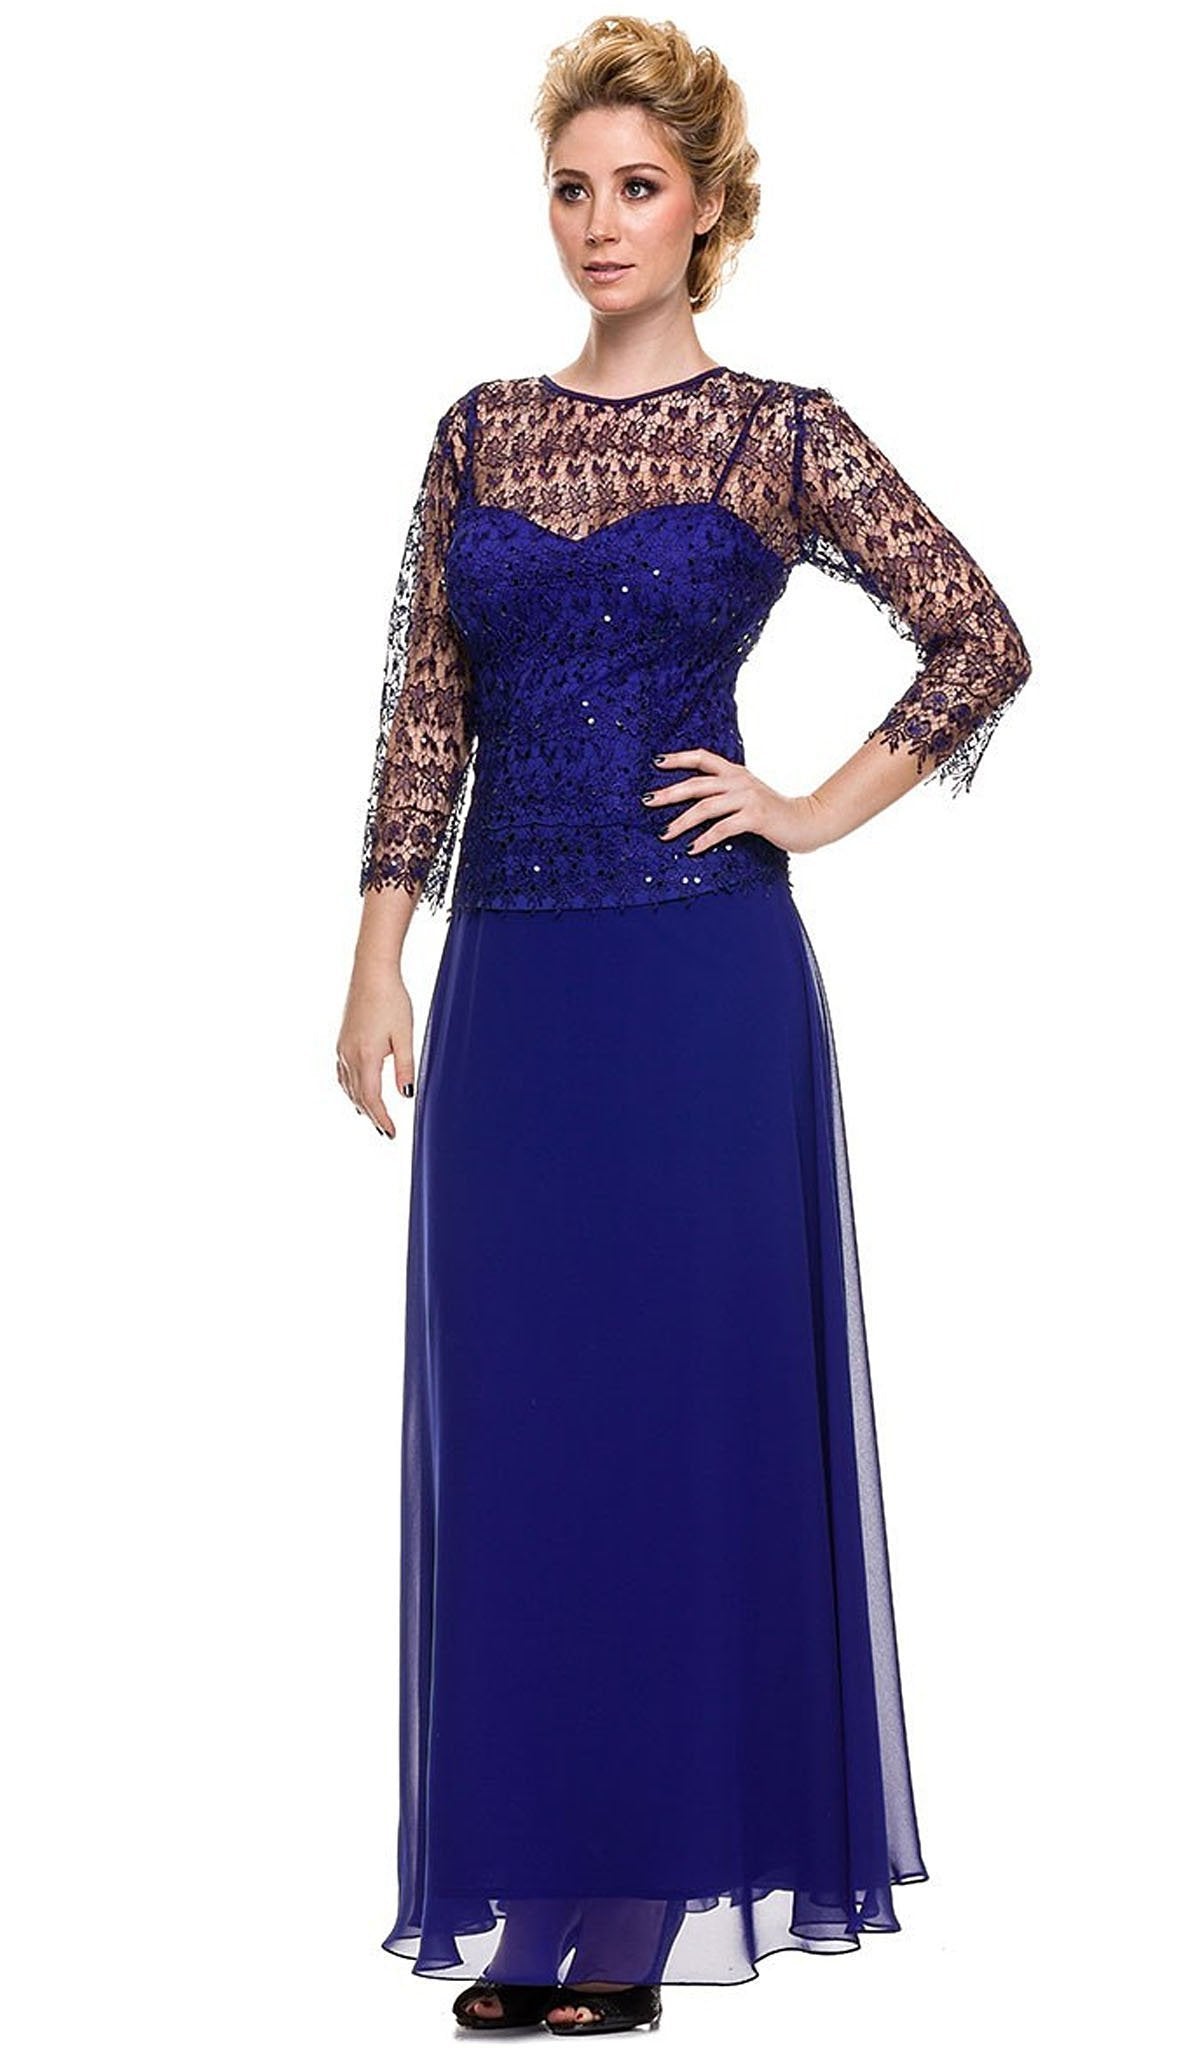 Nox Anabel - 5083 Quarter Sleeves Lace Overlay Top Long Formal Dress Special Occasion Dress M / Royal Blue